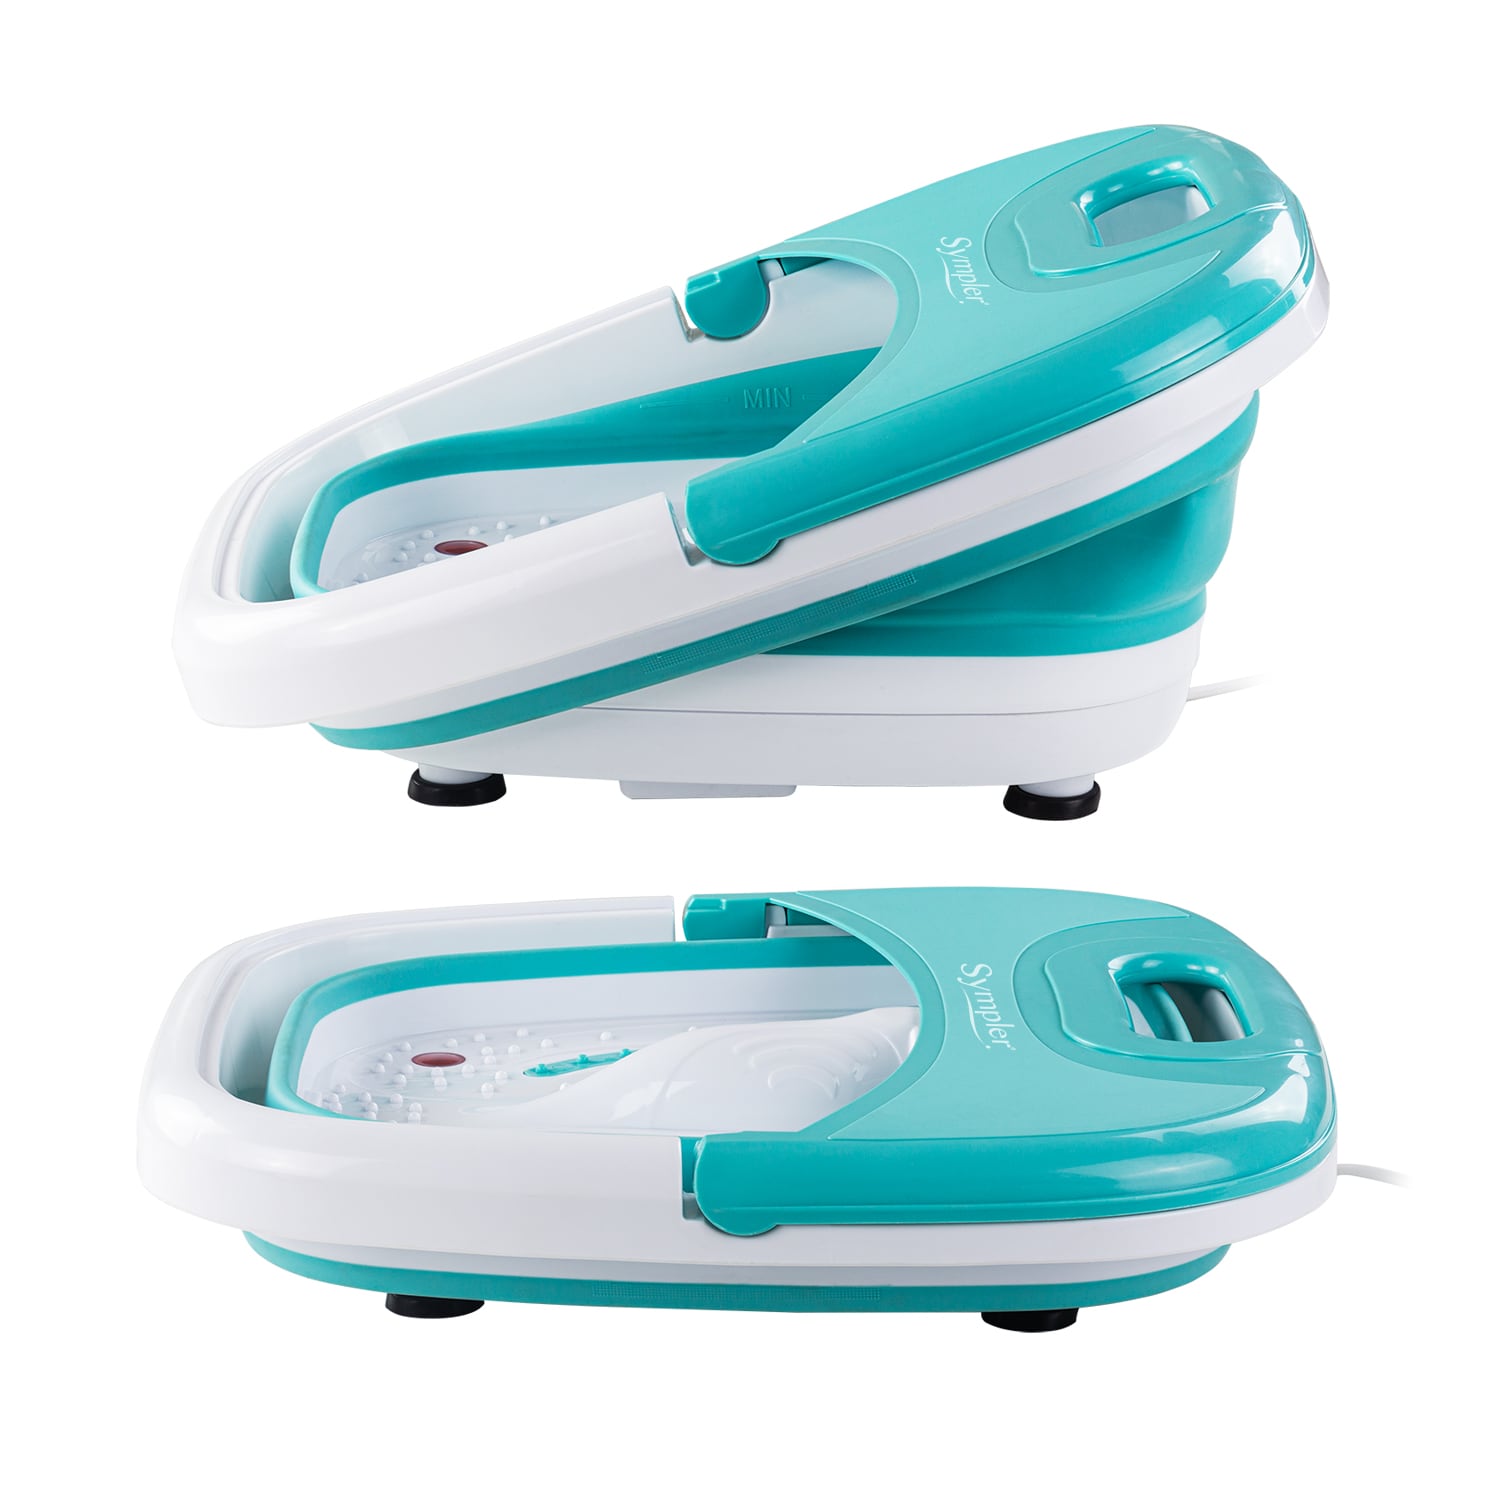 Power Pedi Foot Spa® - Collapsible, At-Home Spa Softens Feet & Improves Circulation  Woolworths Marketplace   